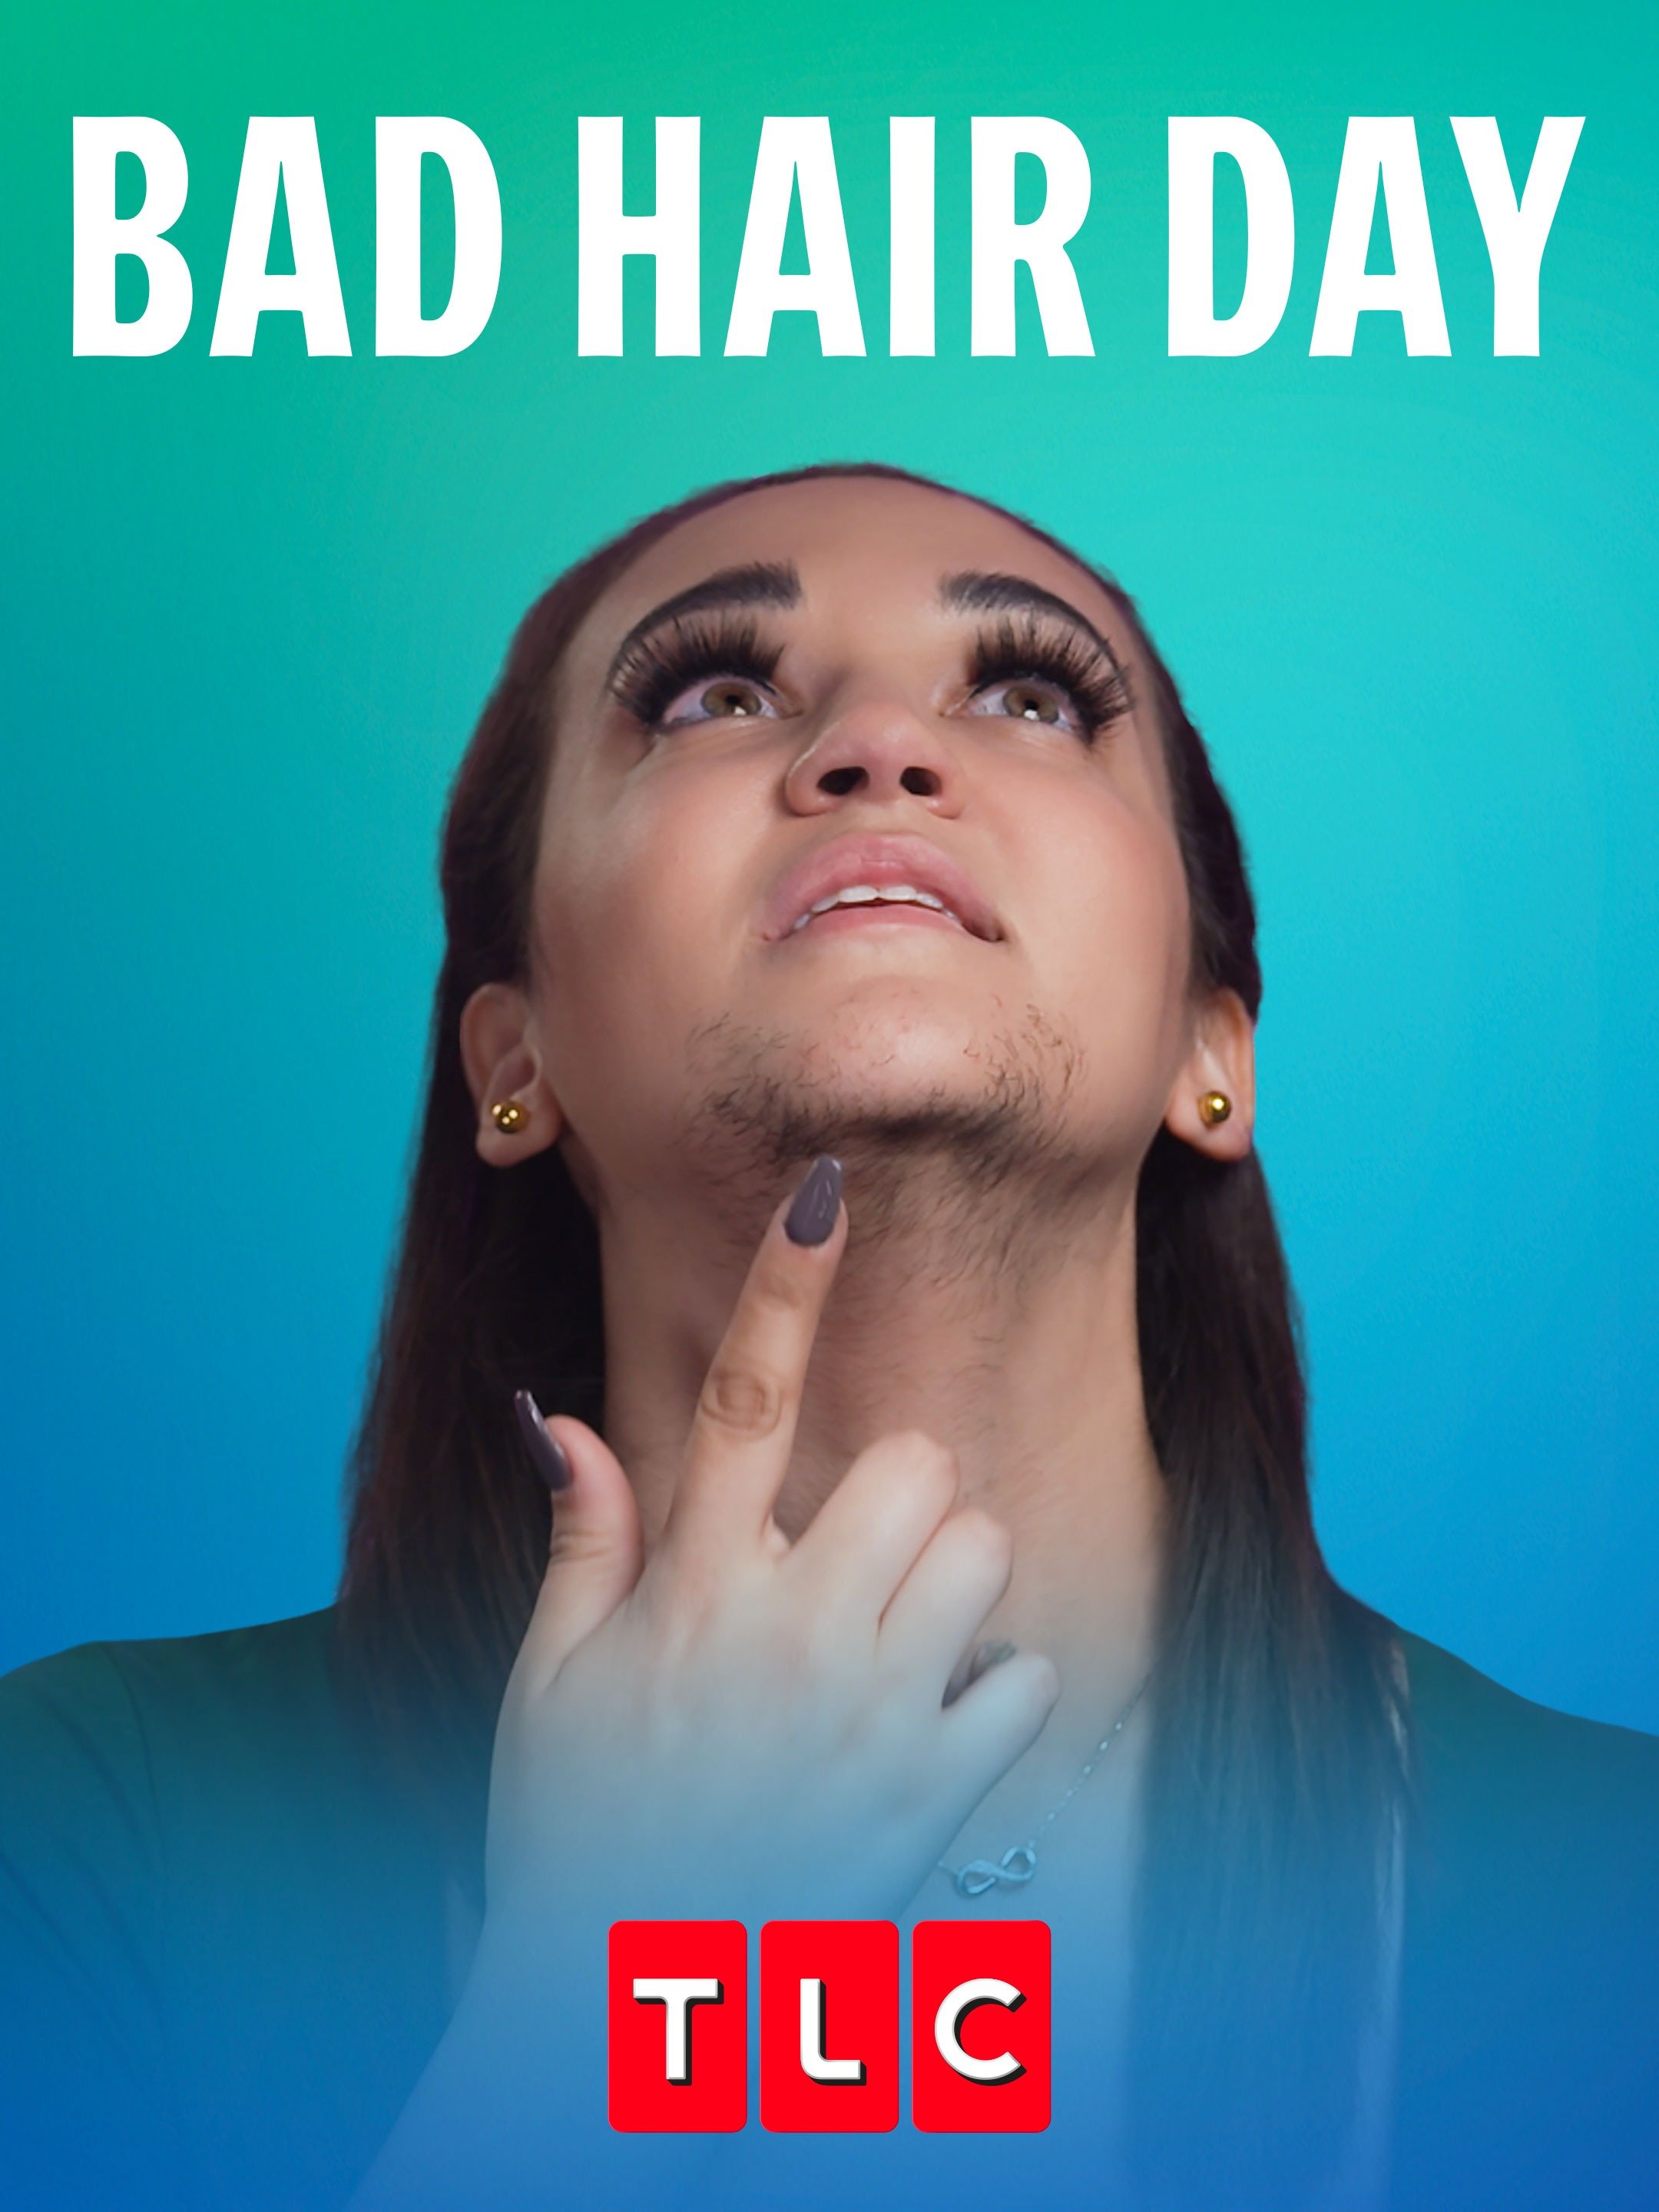 How to avoid a bad hair day